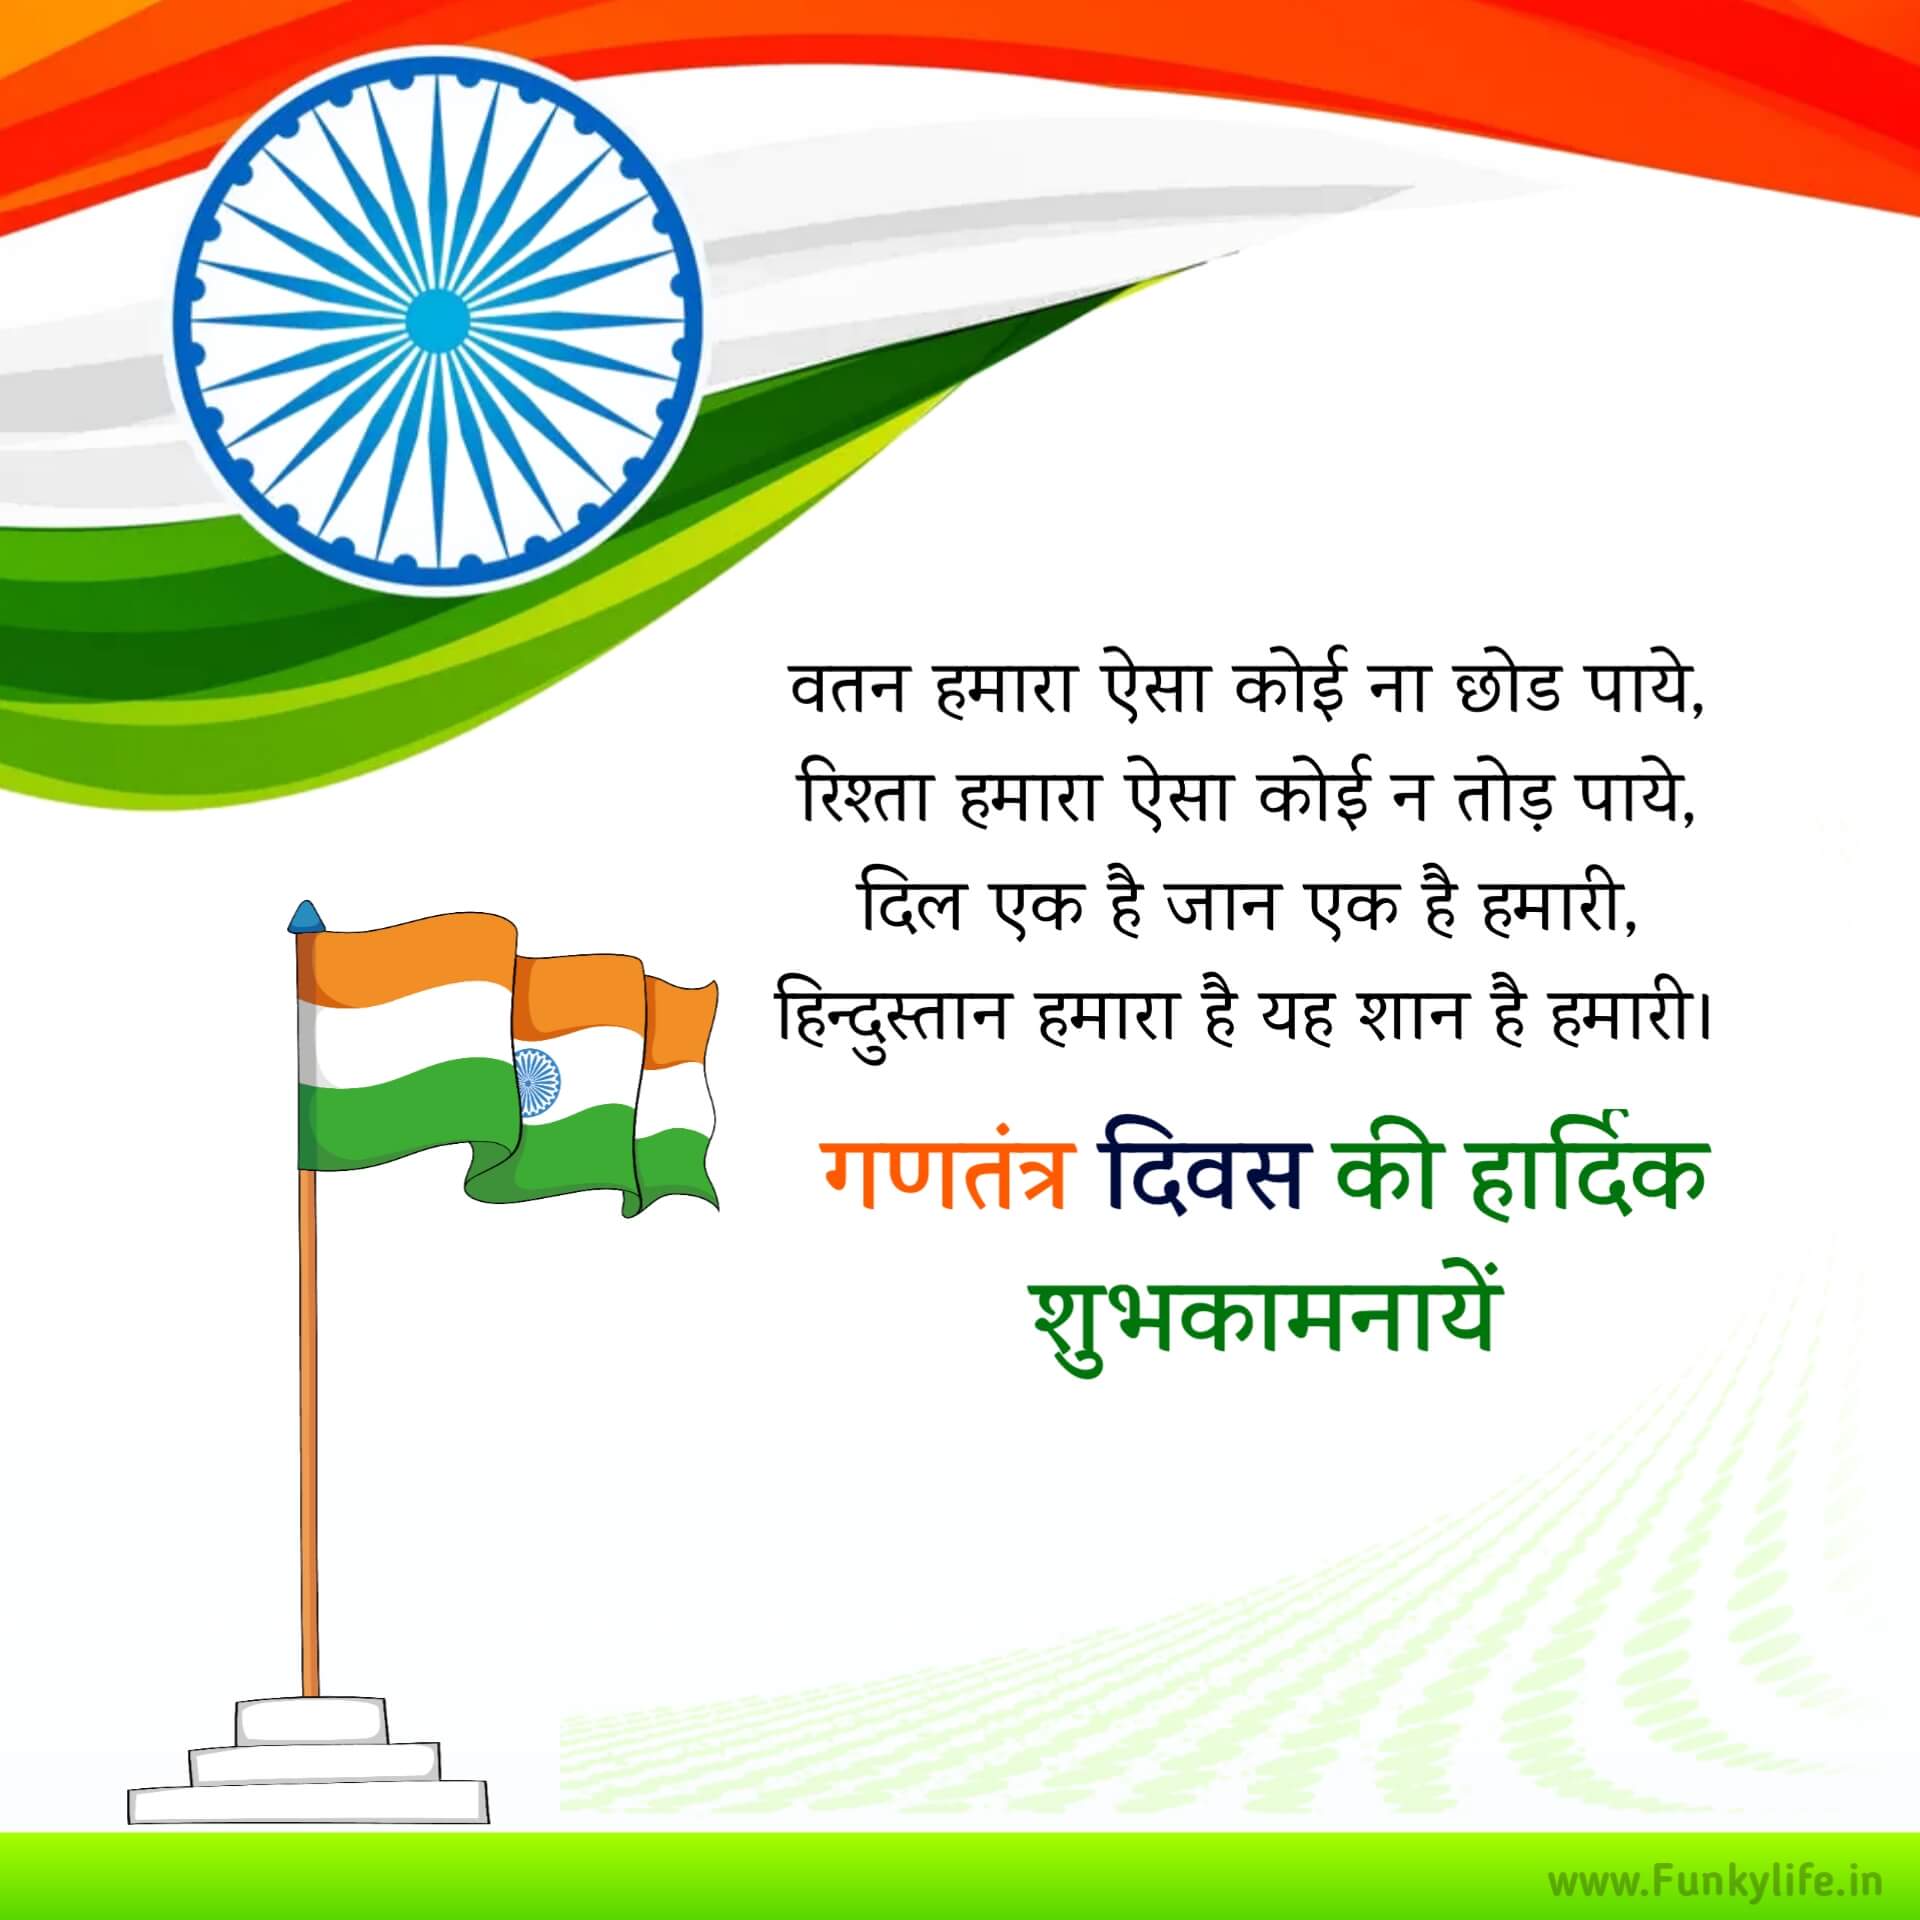 Republic Day Wishes in Hindi for Facebook